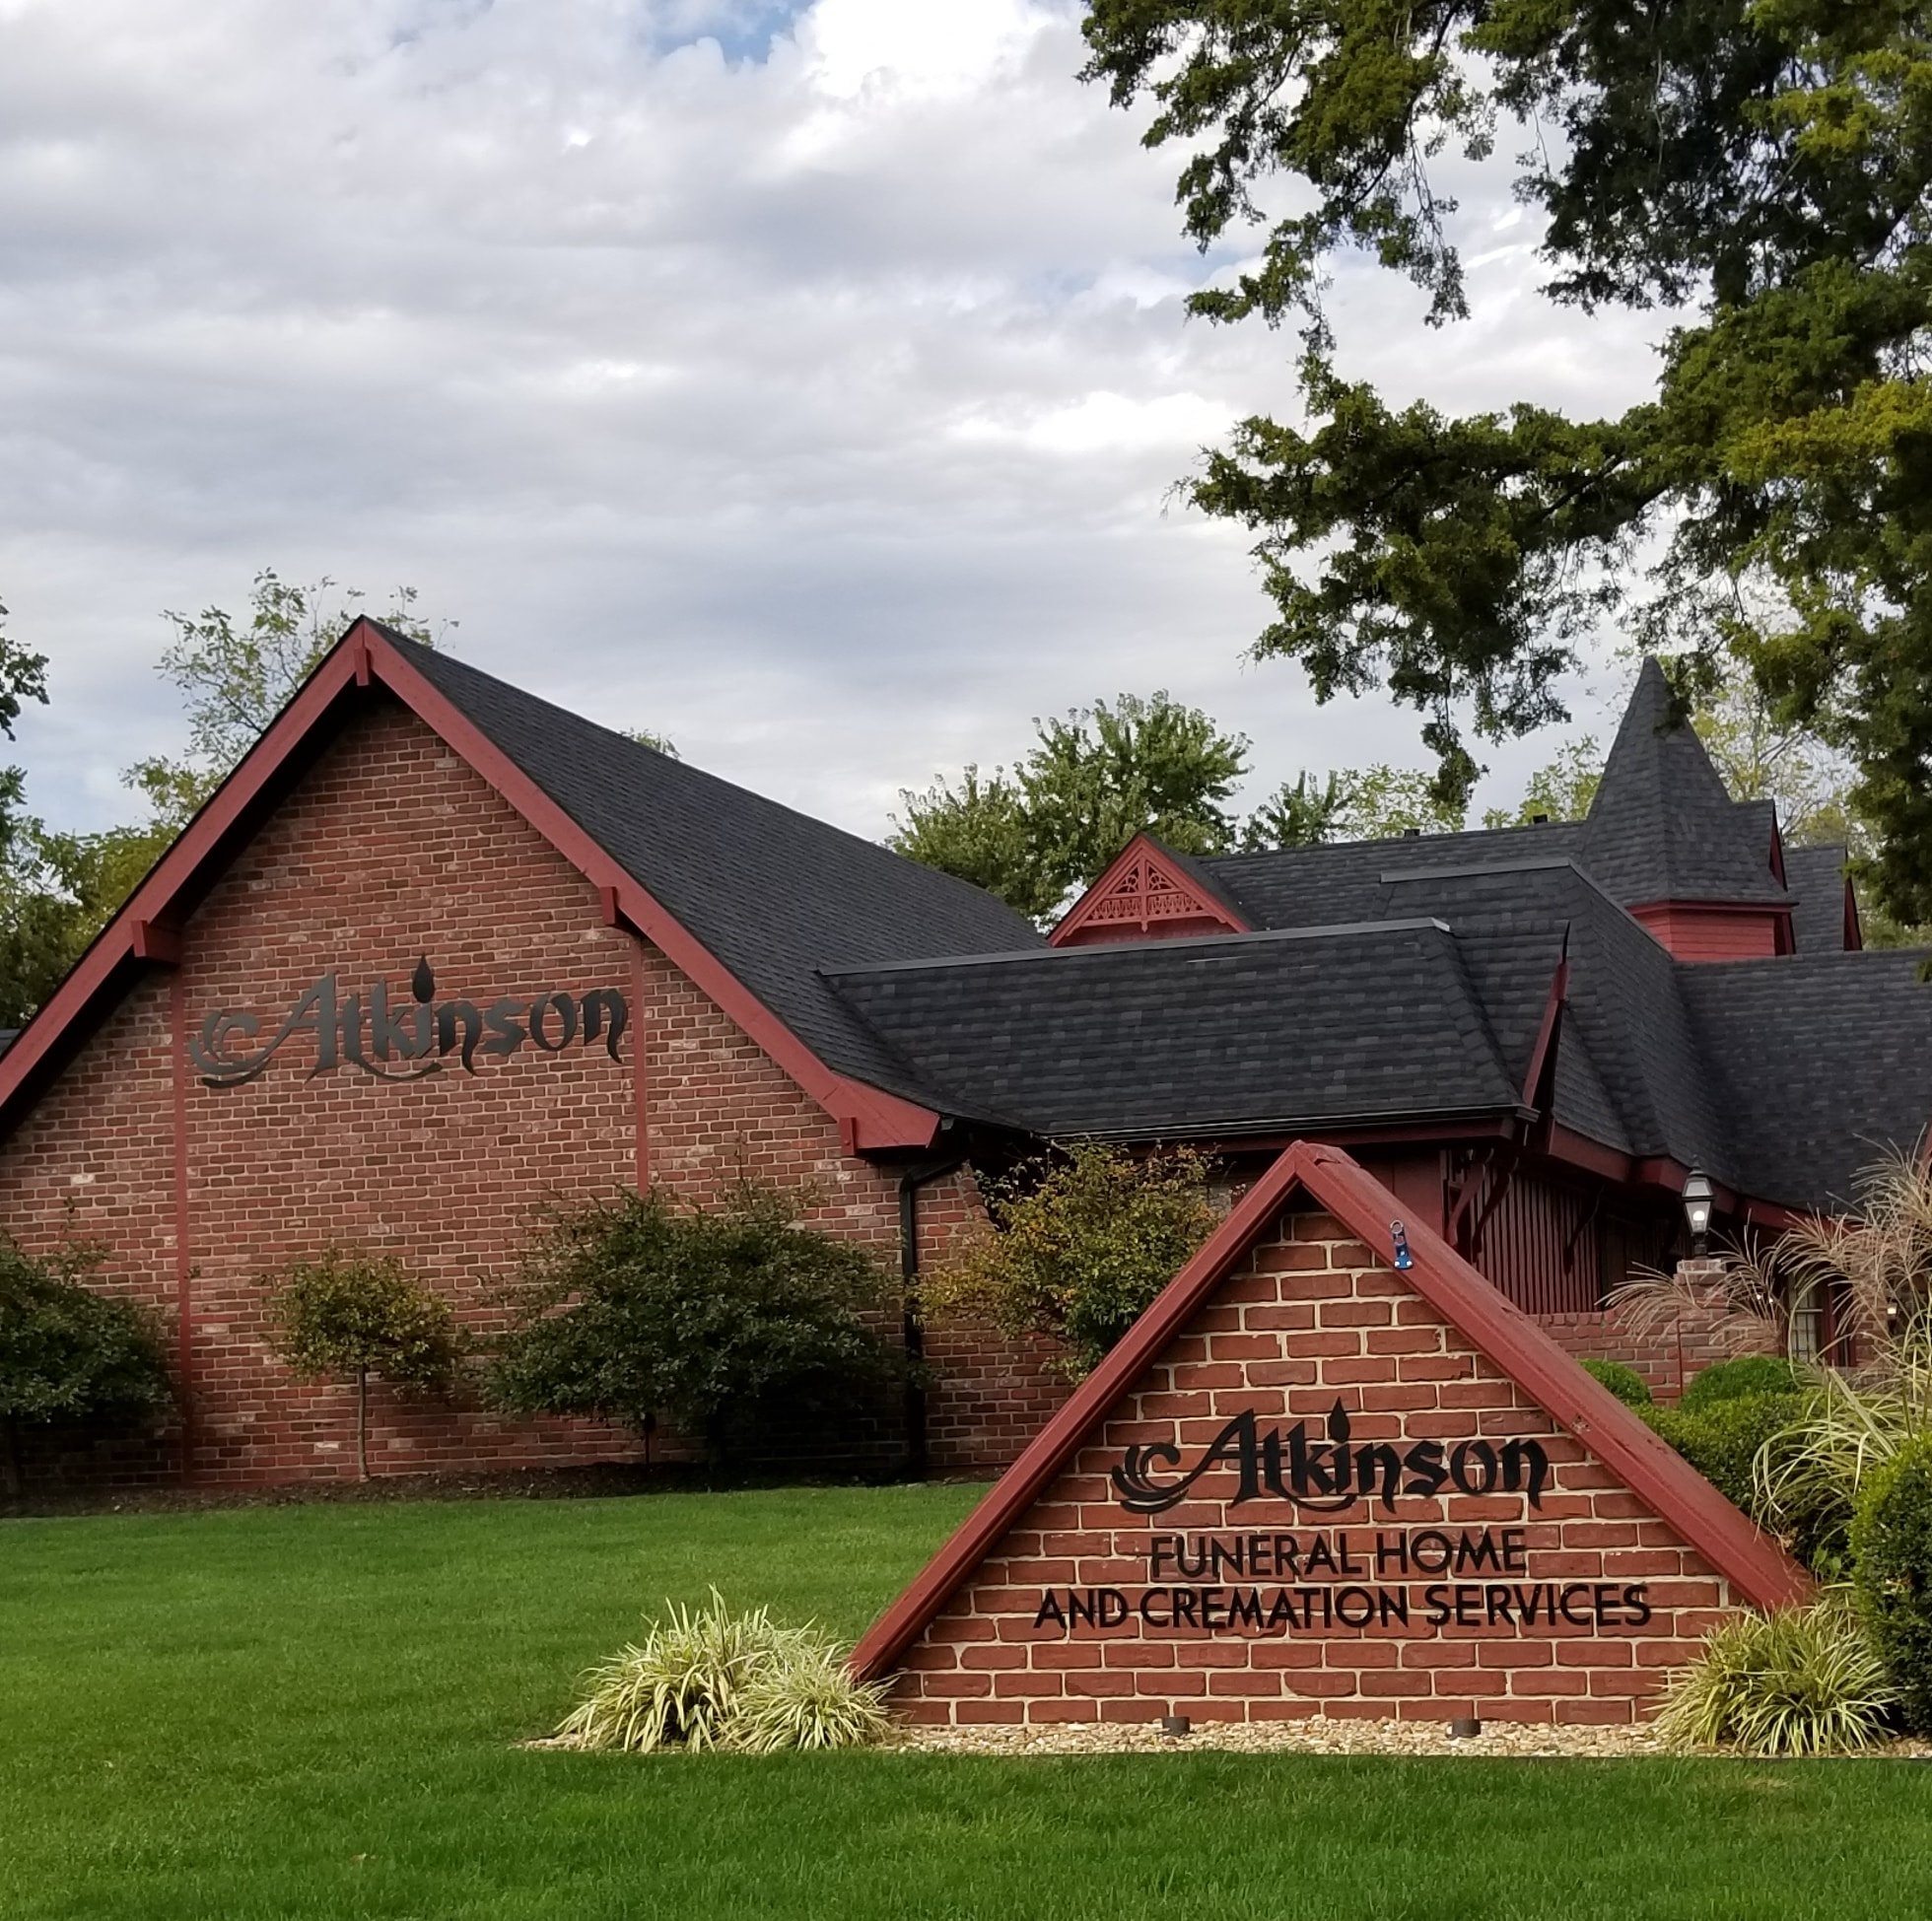 Atkinson Funeral Home